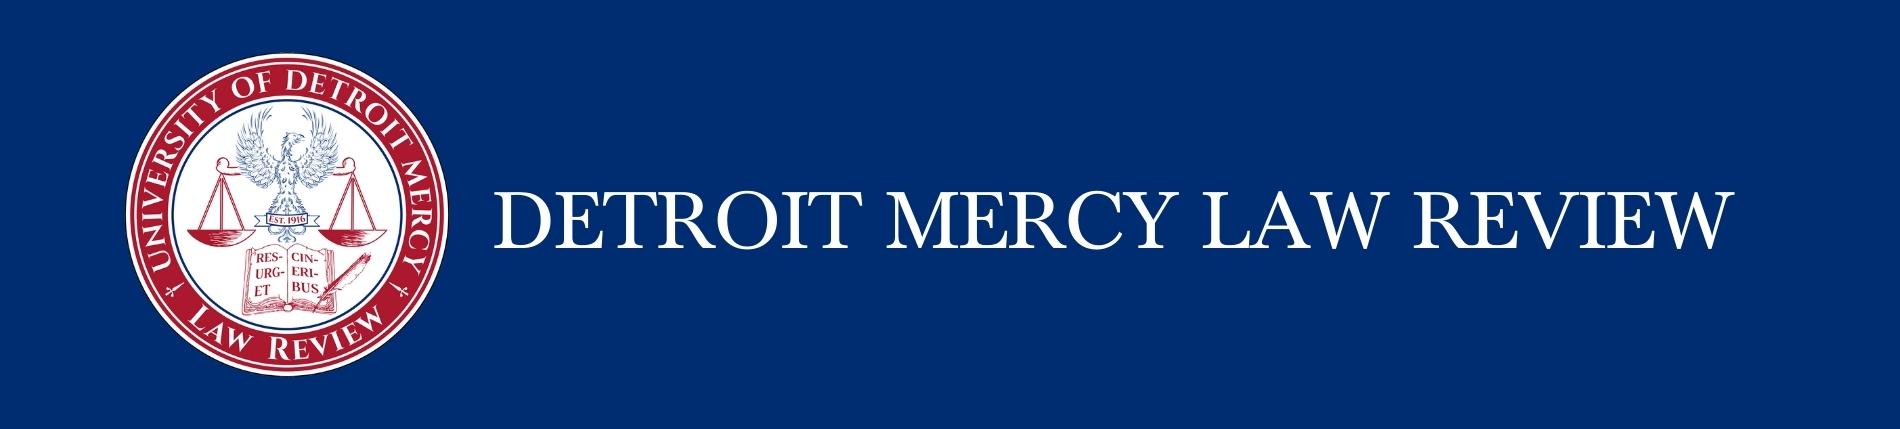 Detroit Mercy Law Review